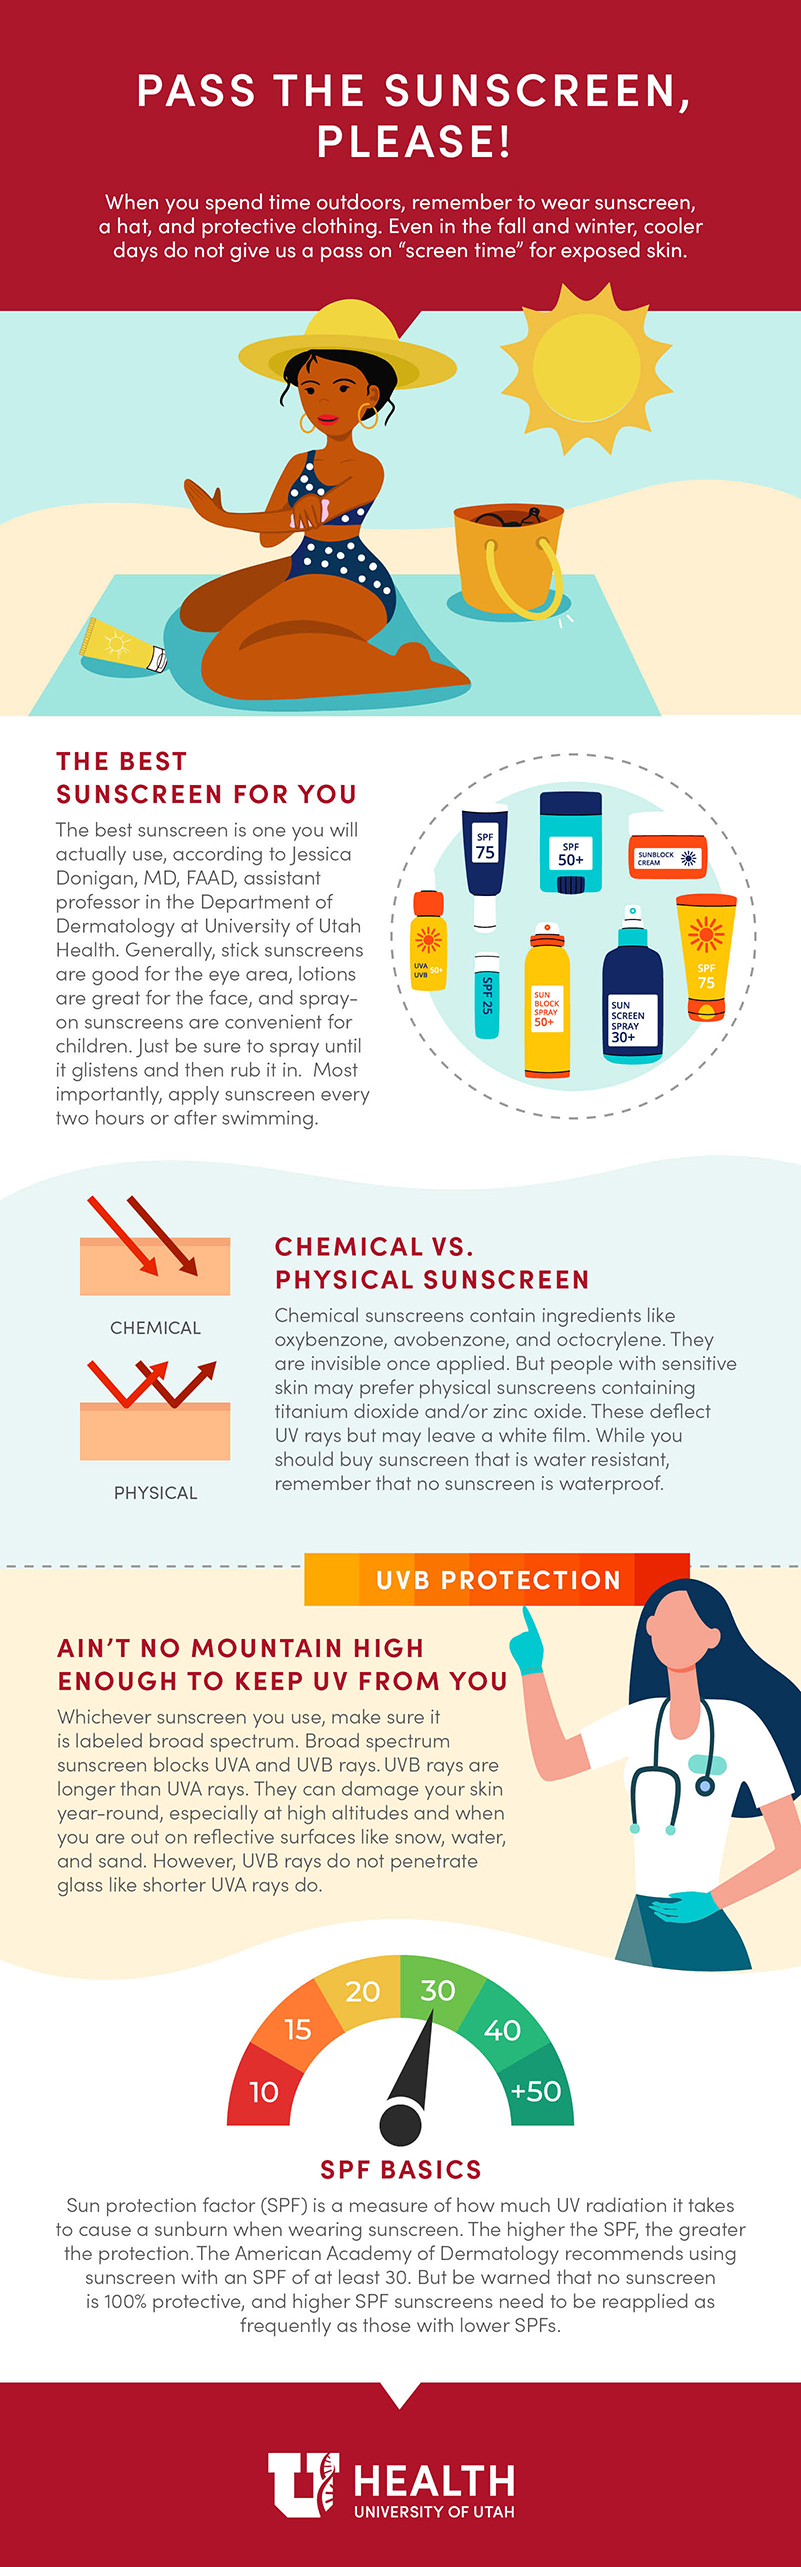 Sunscreen 101 Infographic